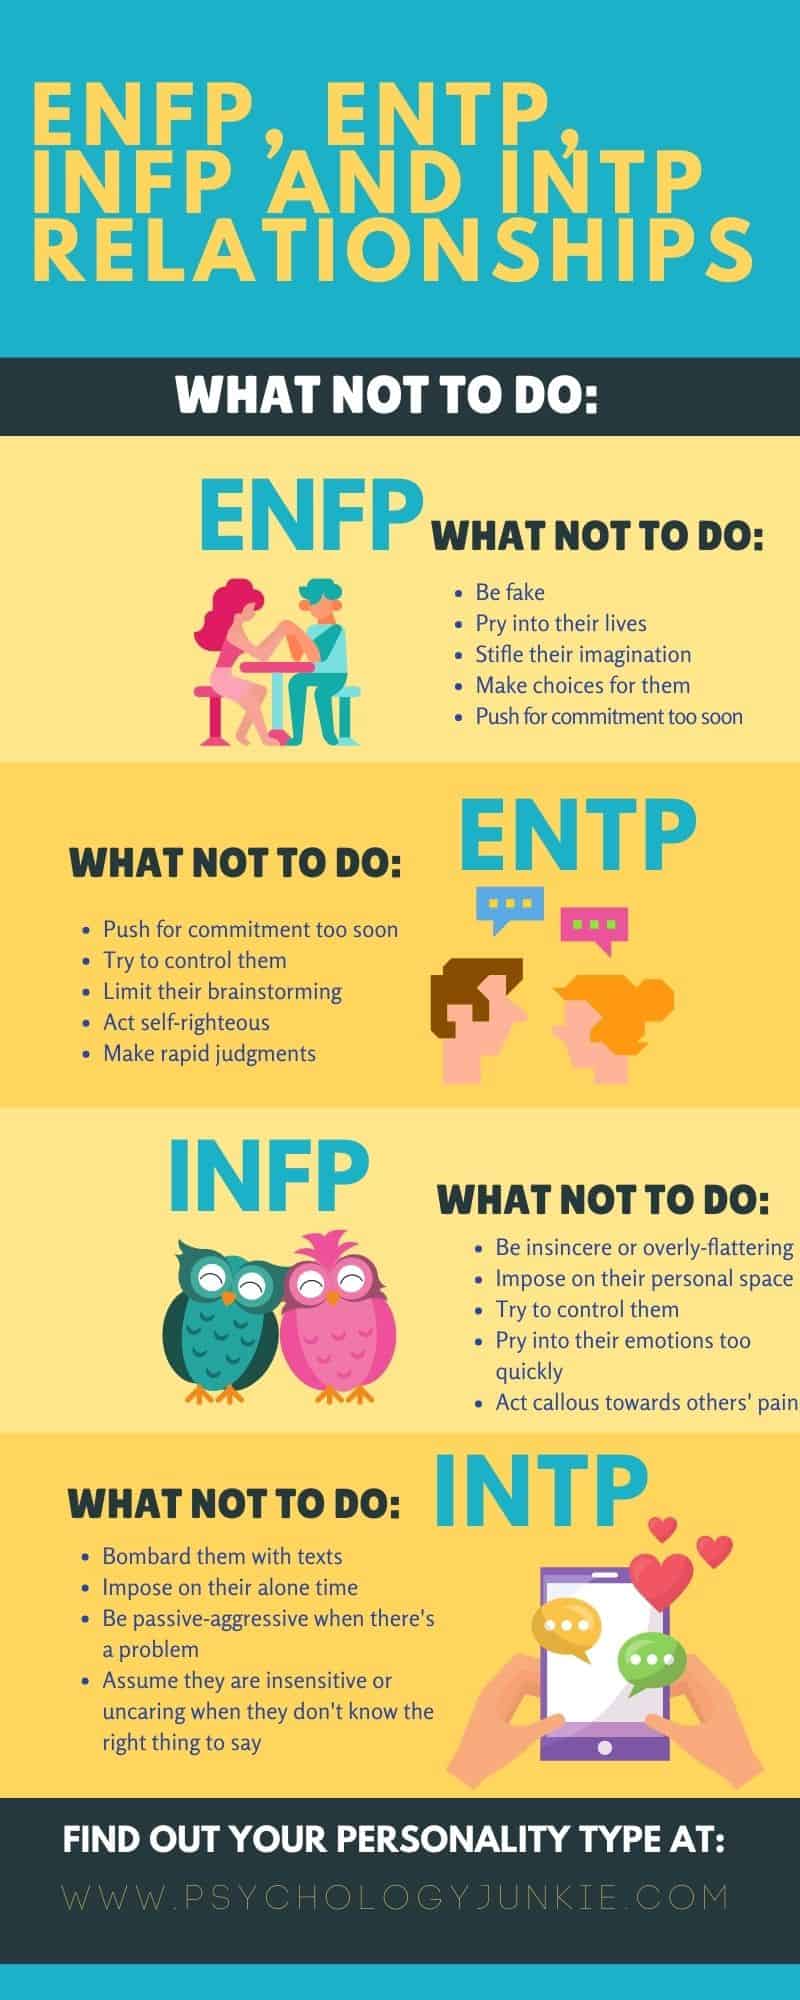 Your Biggest Relationship Fear Based On Your Myers Briggs Personality Type Psychology Junkie